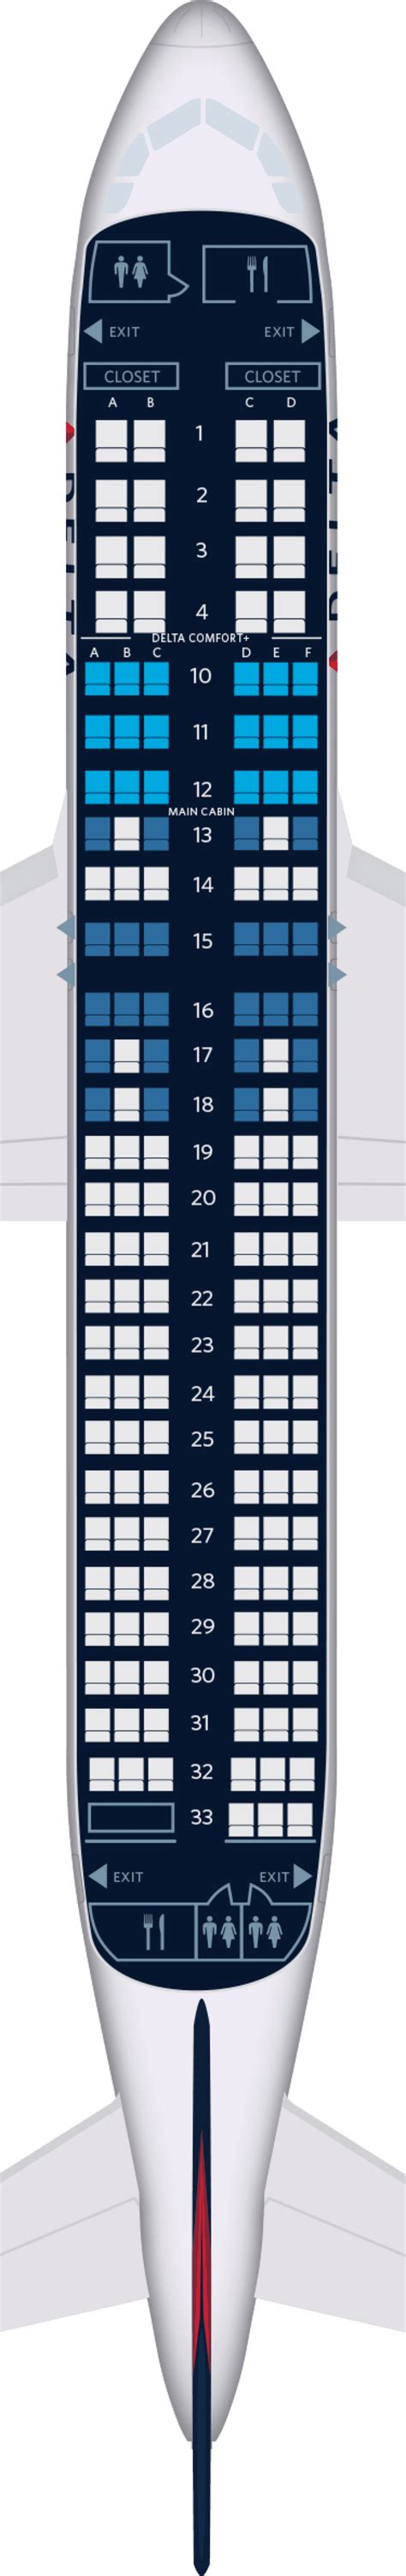  Our Airbus A321-200 aircraft offers a variety of signature products and experiences unlike anything else in the sky. Visit delta.com to learn more. Airbus A321-200 Seat Maps, Specs & Amenities | Delta Air Lines . 